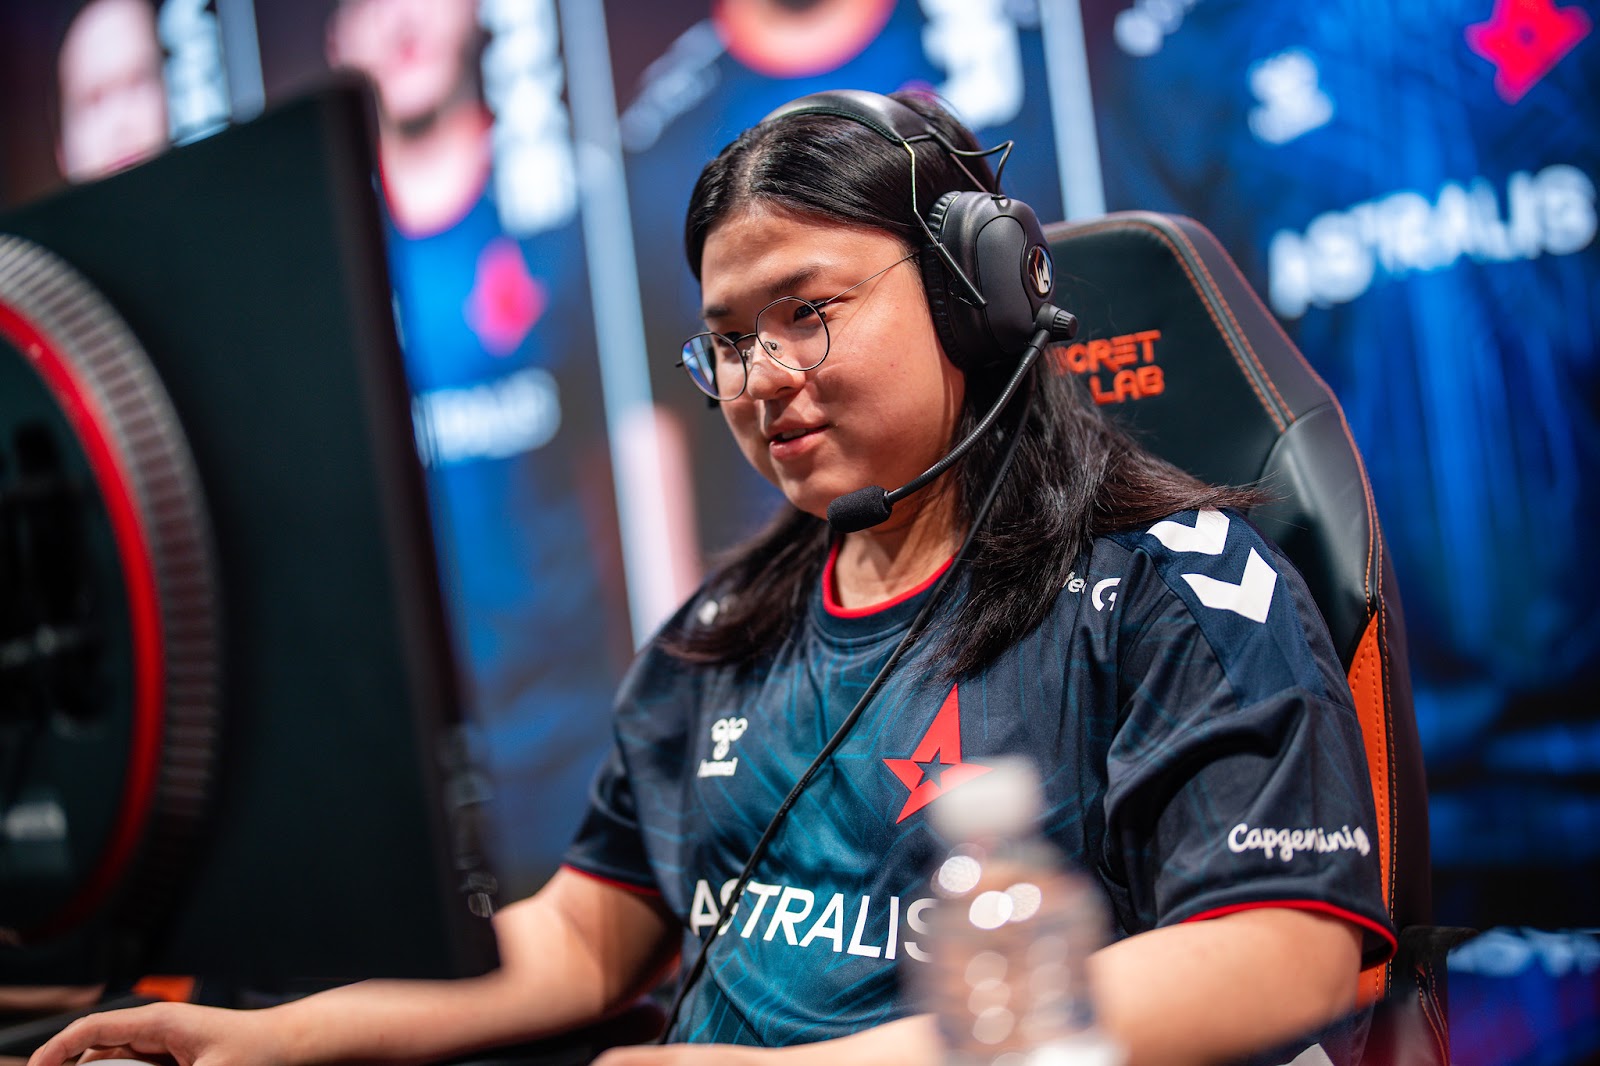 JeongHoon and Astralis have performed the unthinkable as they emerged from the 2022 LEC summer split's first week with a 2-1 record.